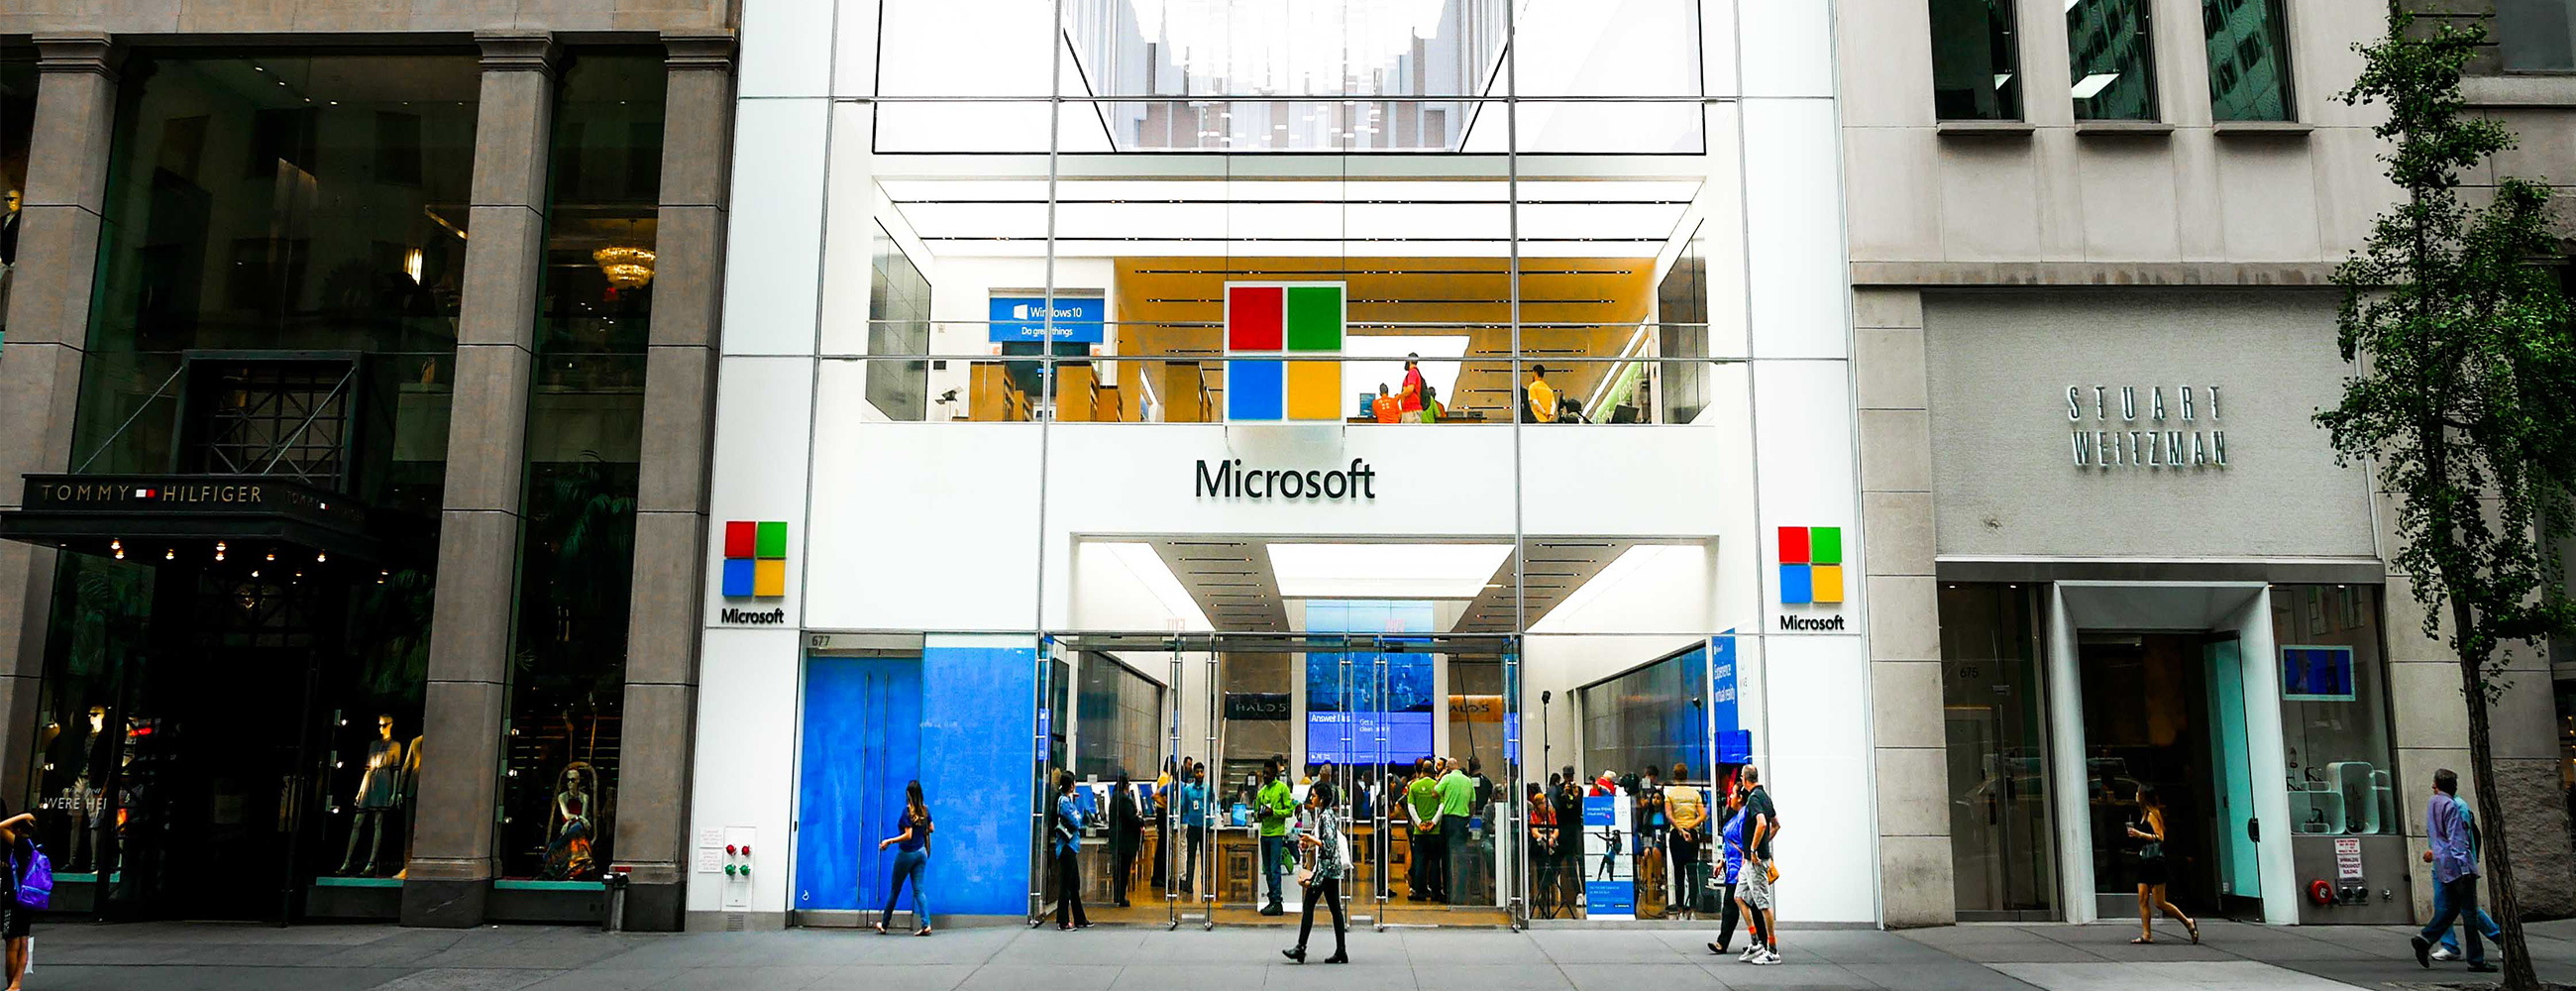 Street view of Microsoft's flagship store on 5th ave, Microsoft's Facade features oversize triple laminates.